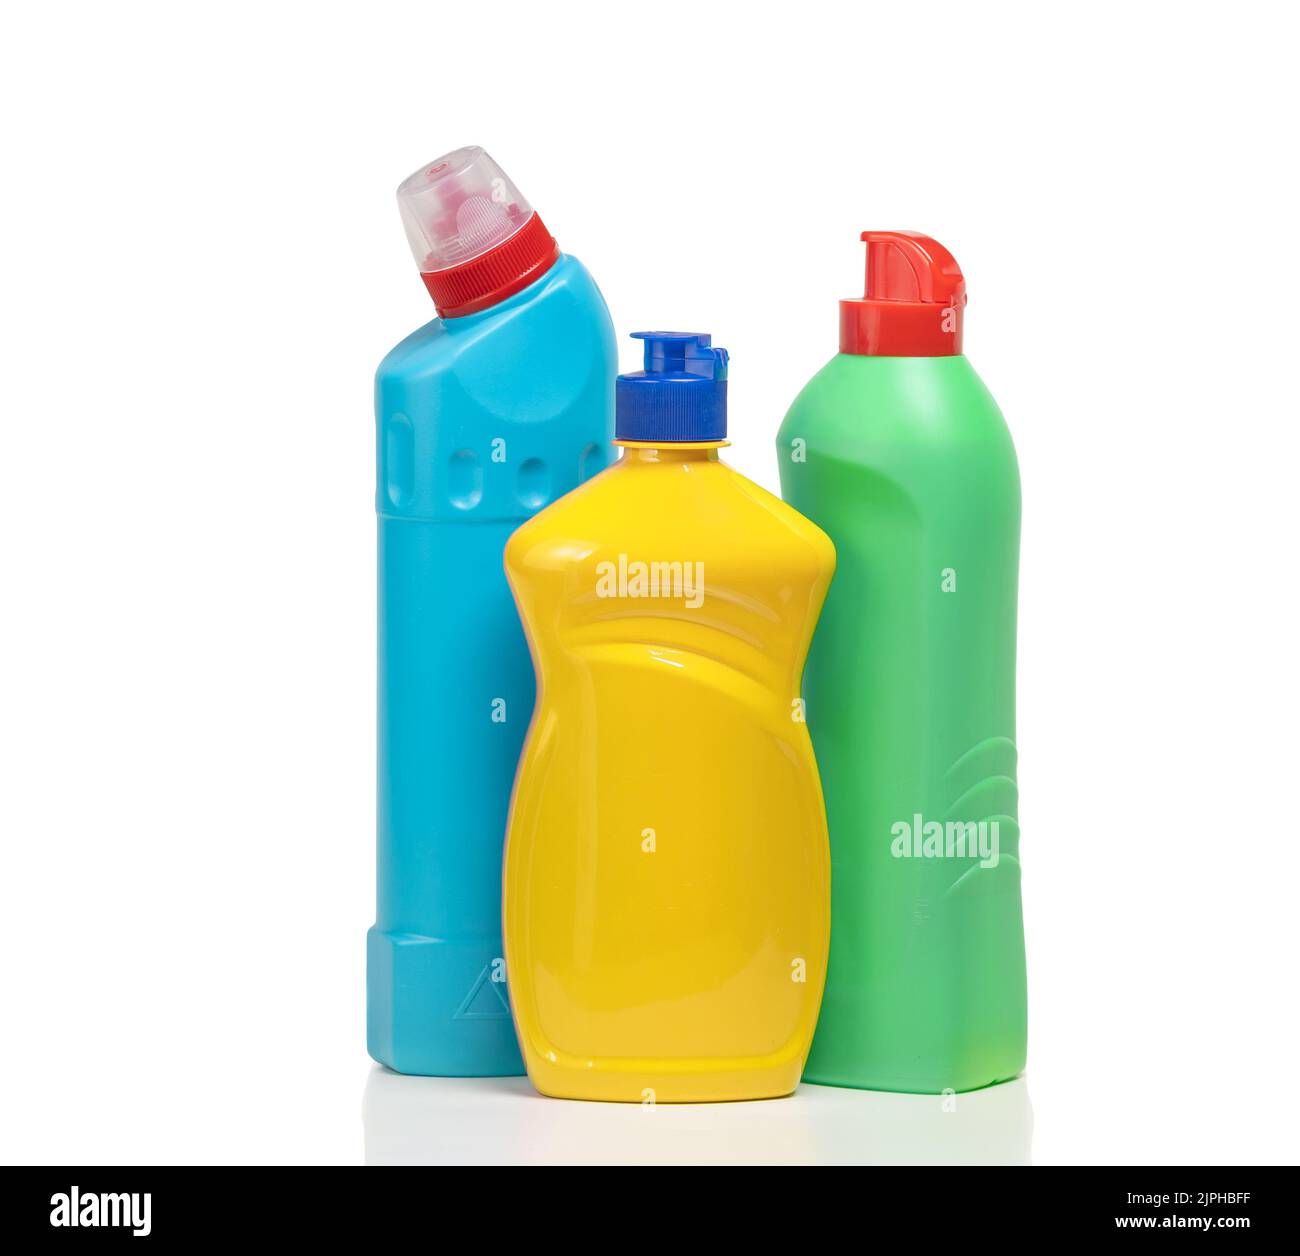 Household cleaning products in plastic bottles isolated on a white background. Colorful plastic bottles product mockup. Stock Photo